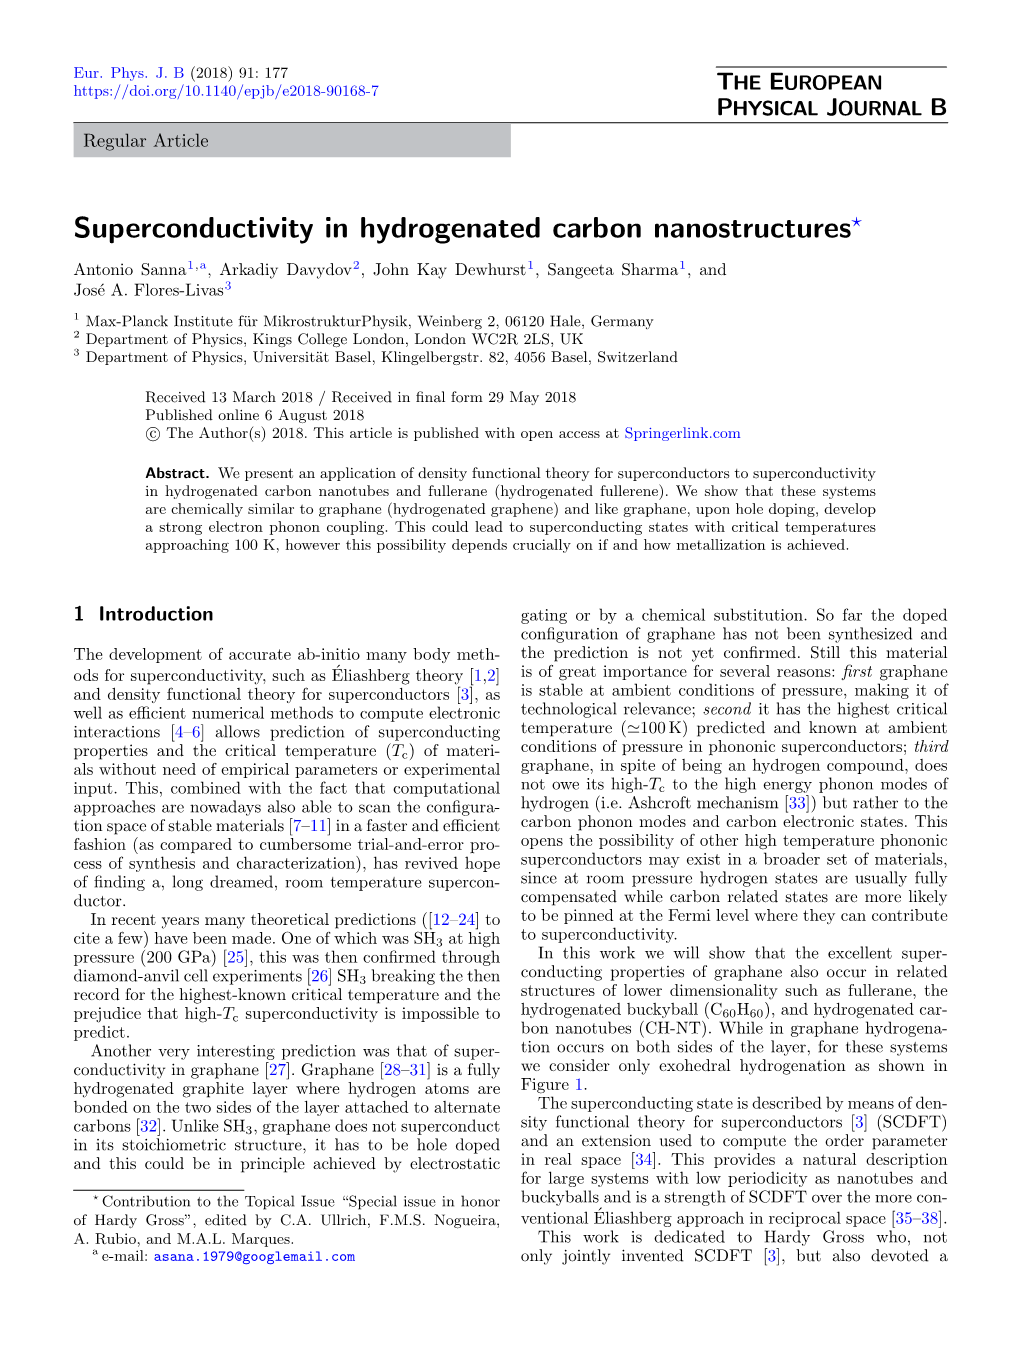 Superconductivity in Hydrogenated Carbon Nanostructures?